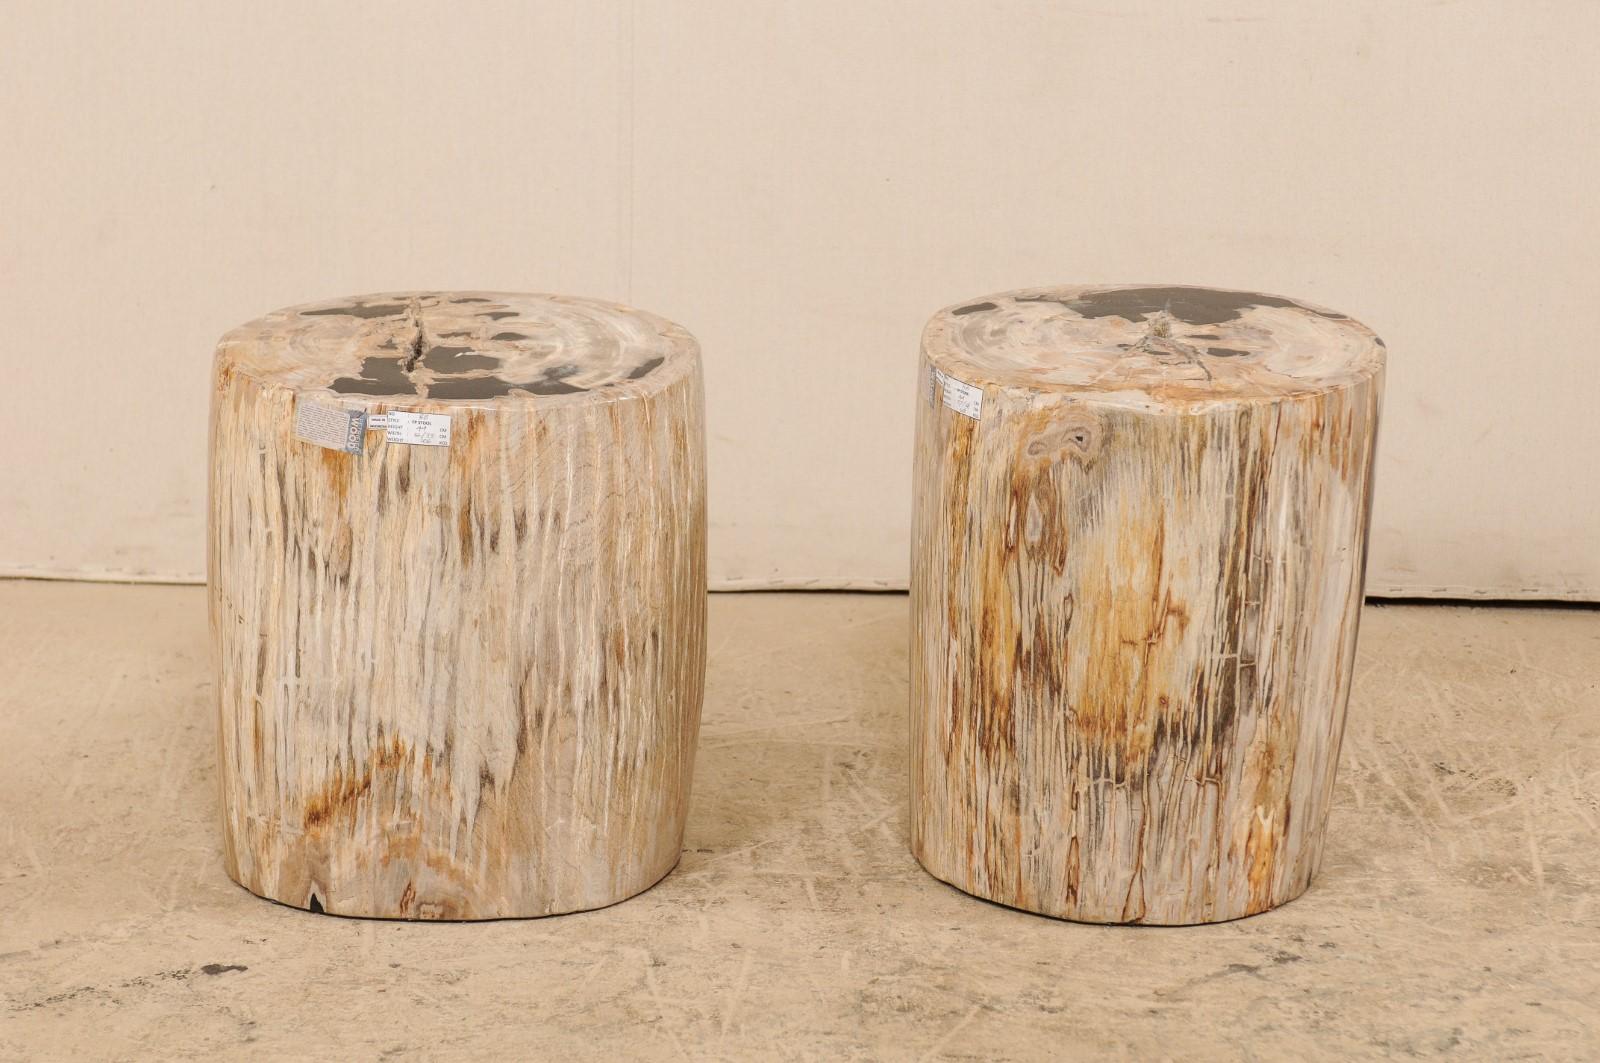 A pair of petrified wood drinks tables (or stools). This pair of petrified wood pedestal tables each have smoothly polished top and sides. The color palette is a beautiful mixture of bone, various shades of brown, and black. Petrified wood is a